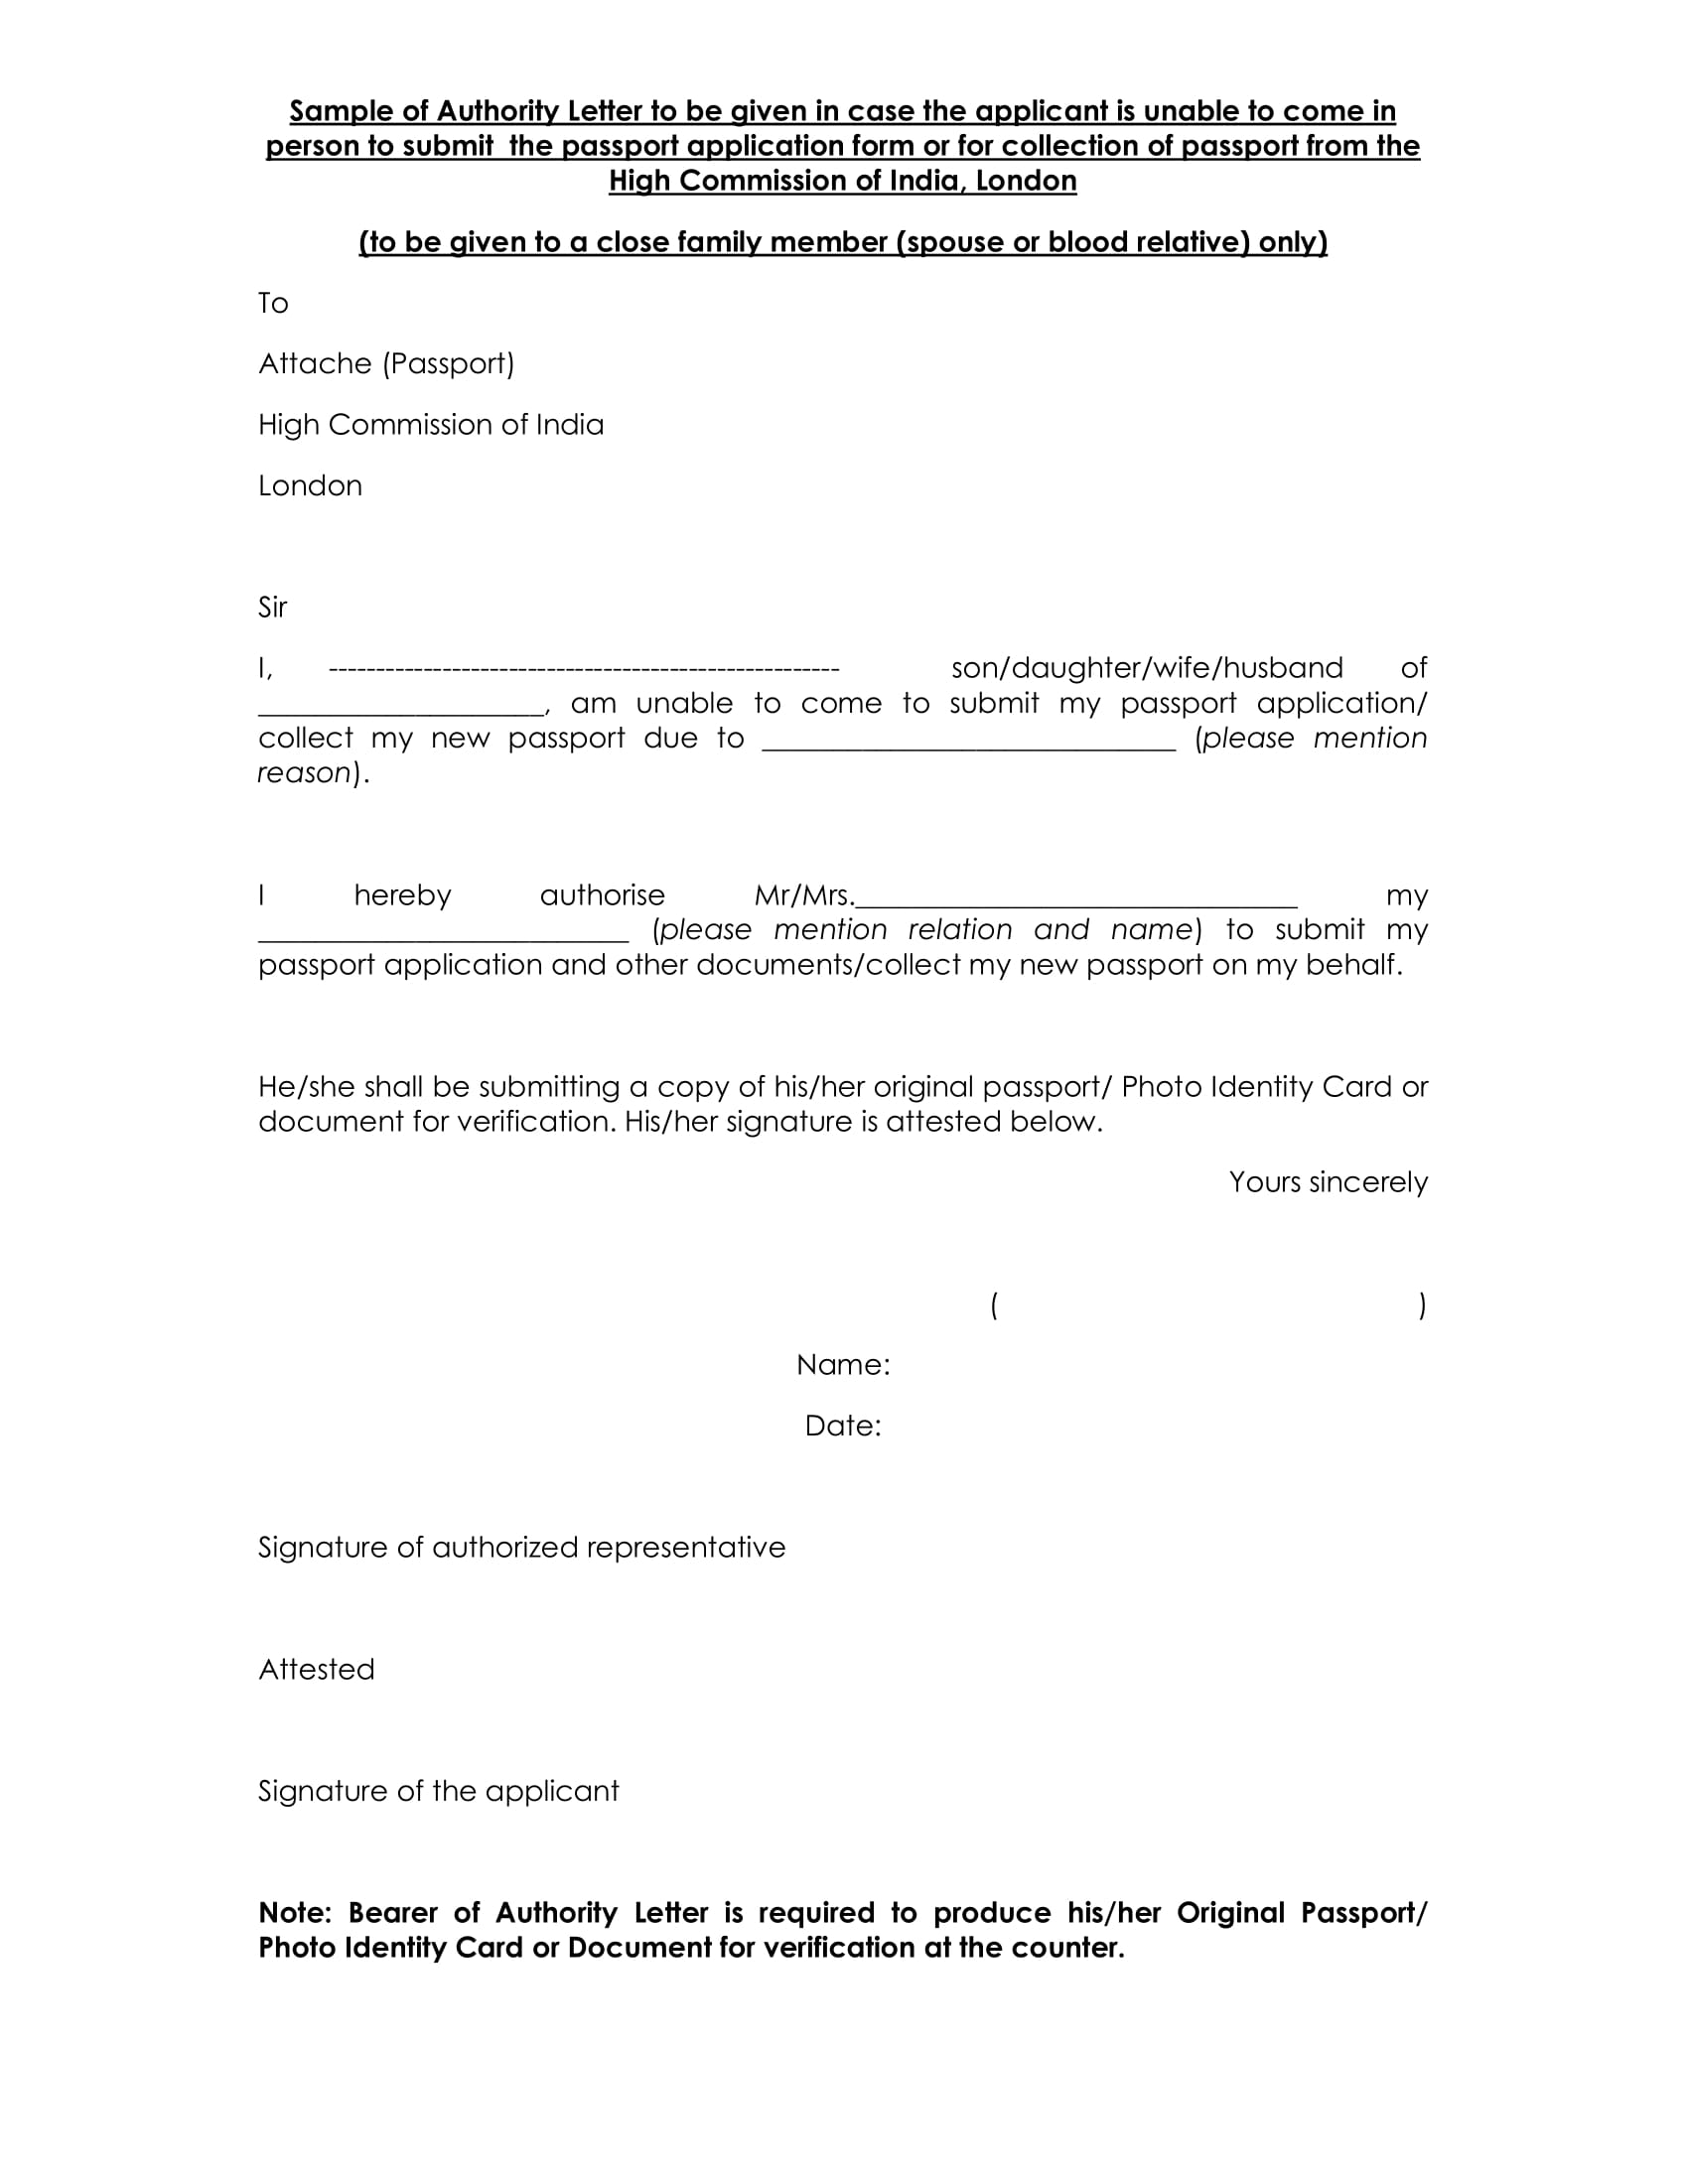 authorization letter for passport application and collection example 1